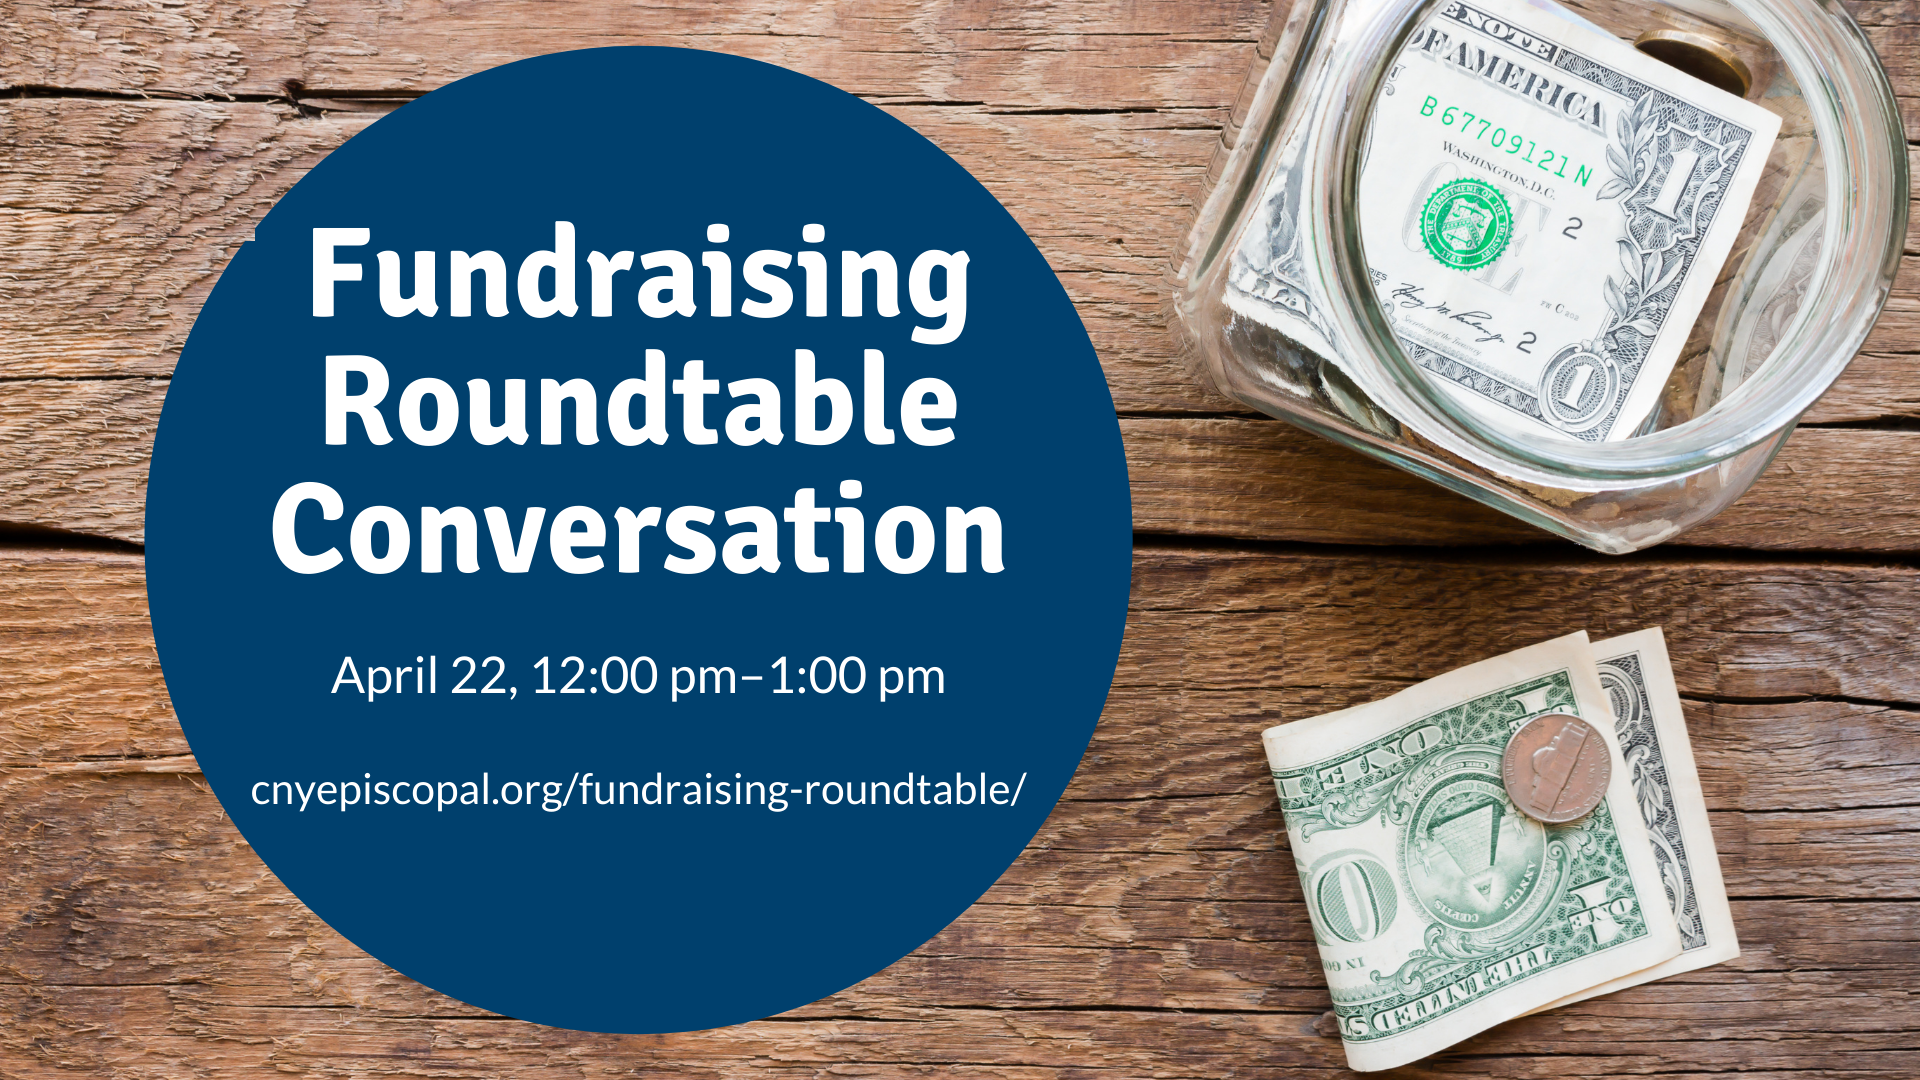 Fundraising Roundtable Conversation The Episcopal Diocese Of Central New York